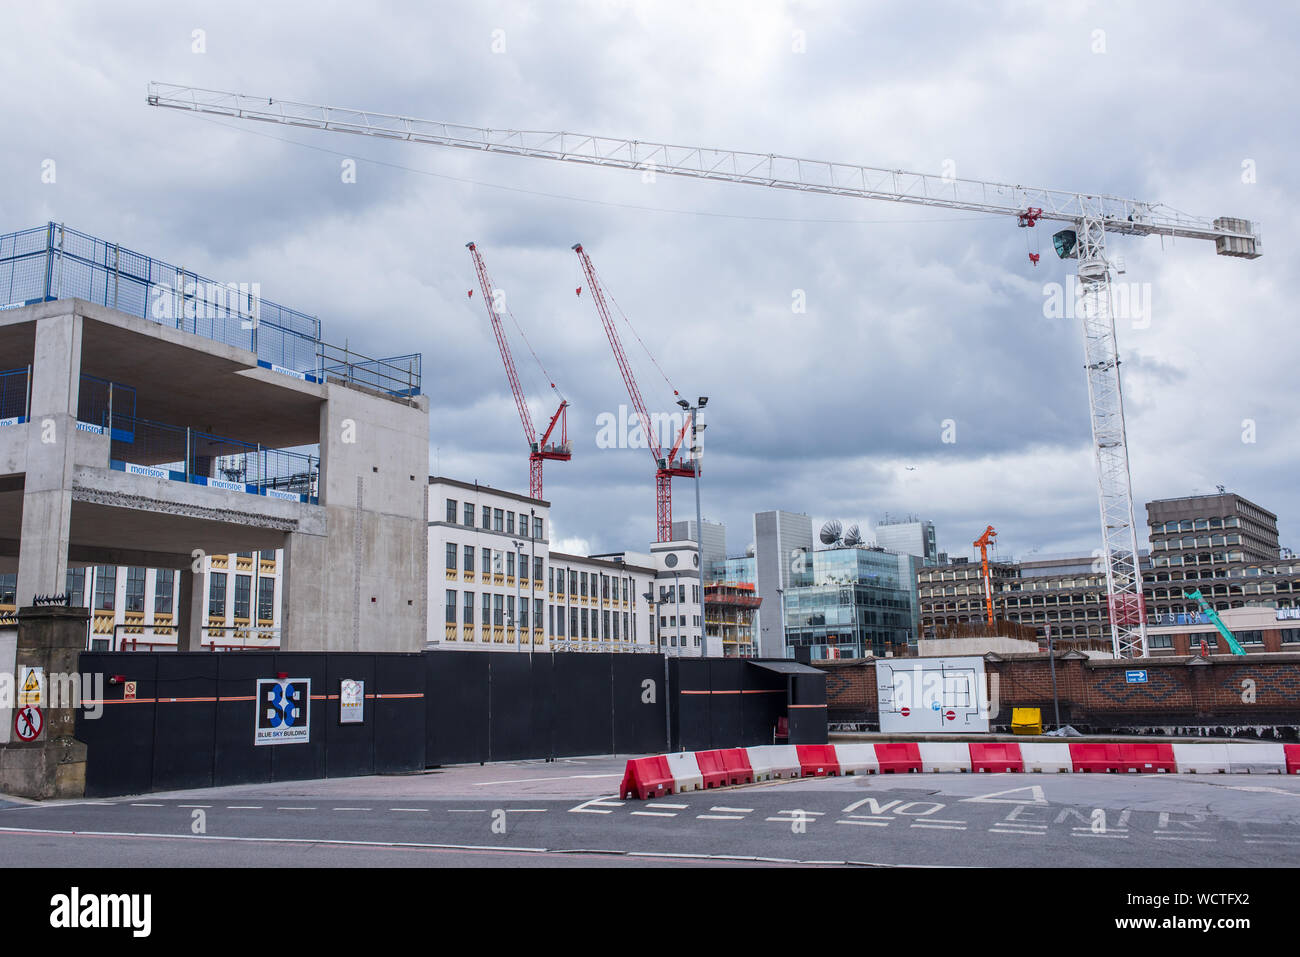 London, UK - August  2019: Huge construction yard with three big cranes working on new property development in central London Stock Photo